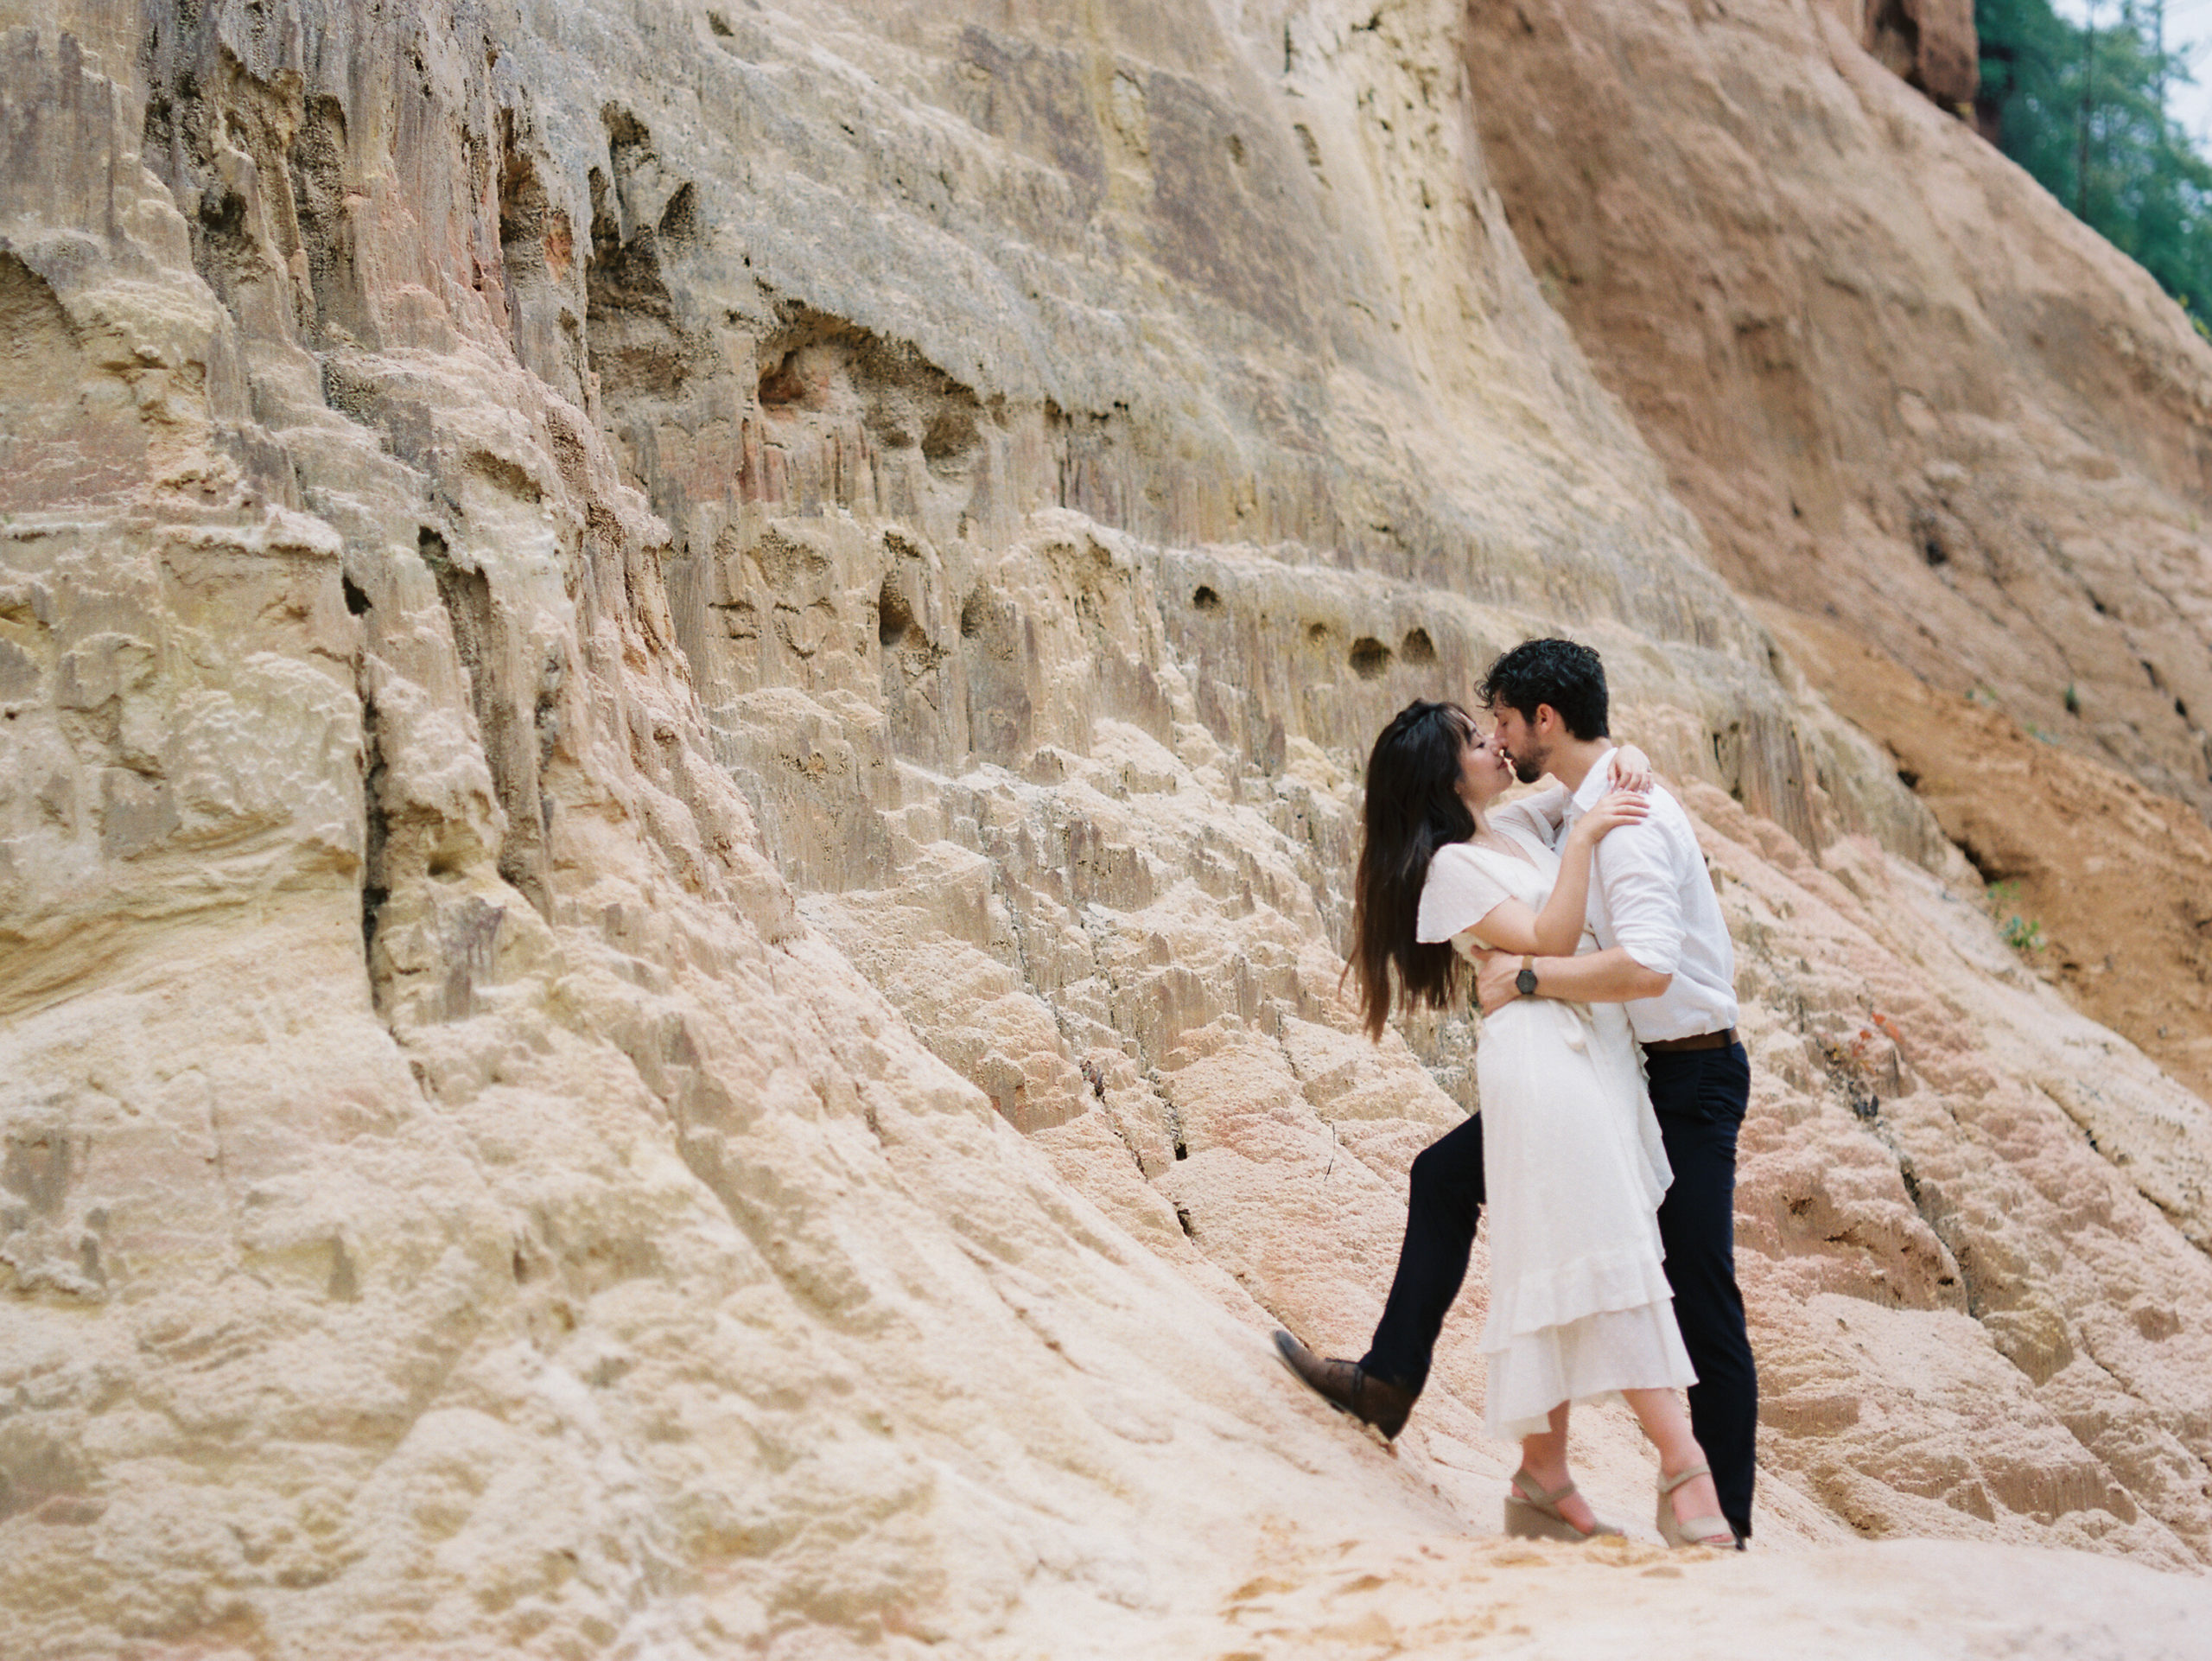 Casual desert canyon elopement with inter-racial couple by J.J. Au'Clair